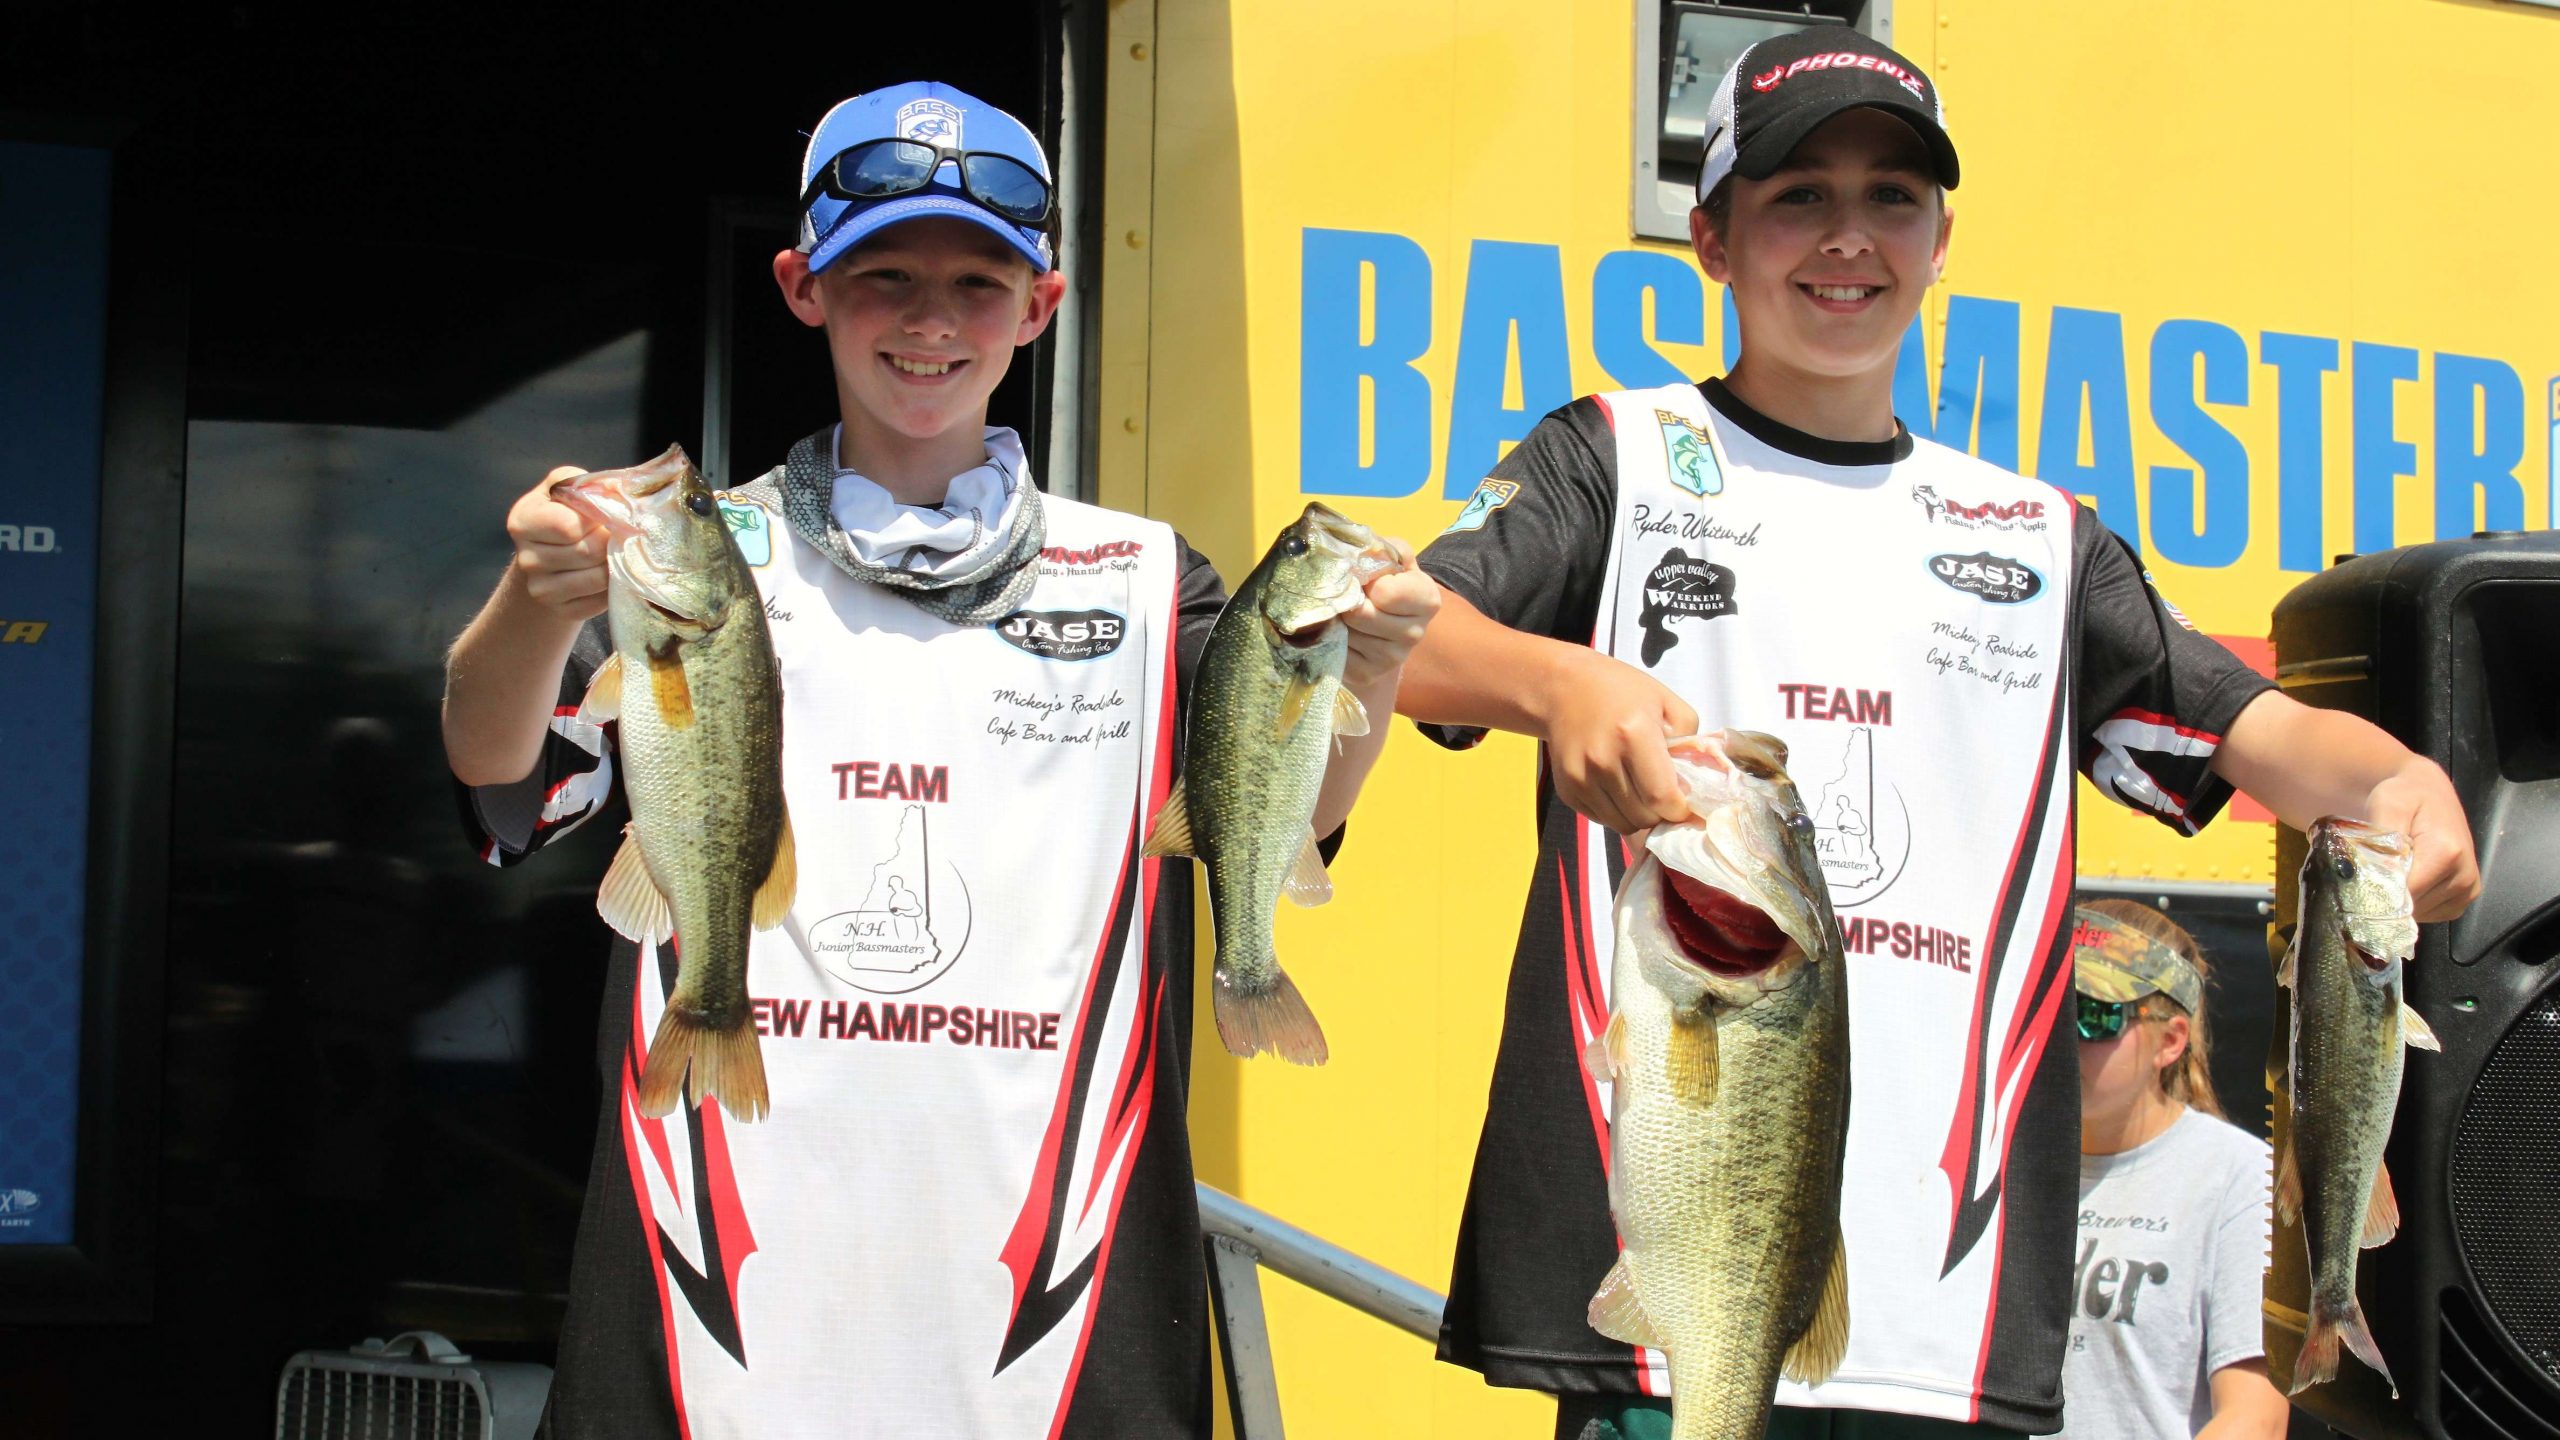 Cole Moulton and Ryder Whitworth of New Hampshire are in ninth place with 8-1.
